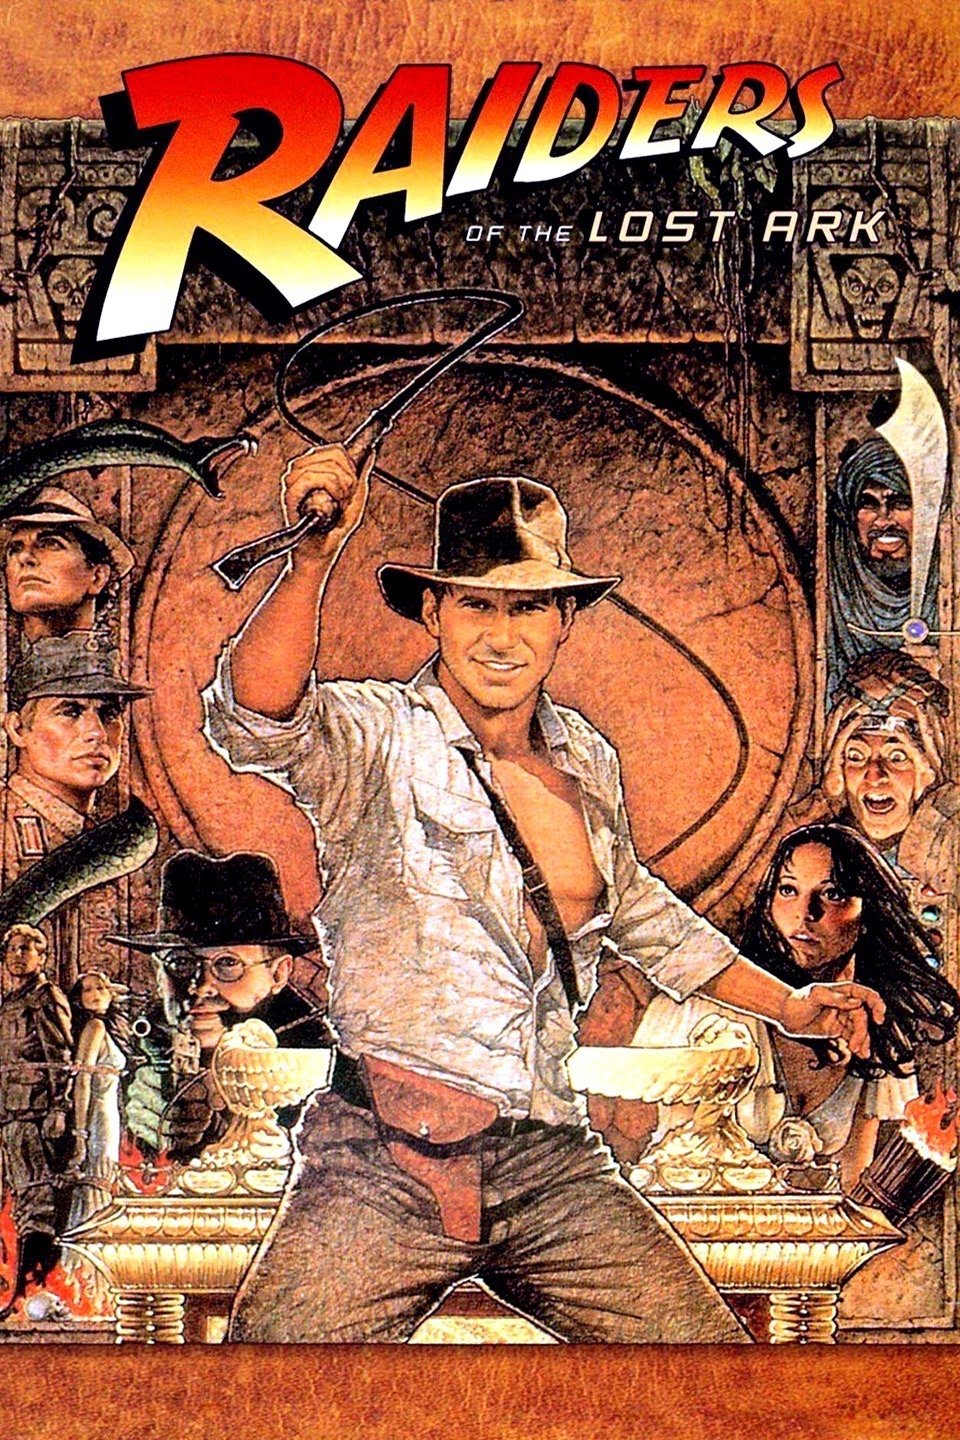 Movie Review 1981 Raiders Of The Lost Ark SoundVapors